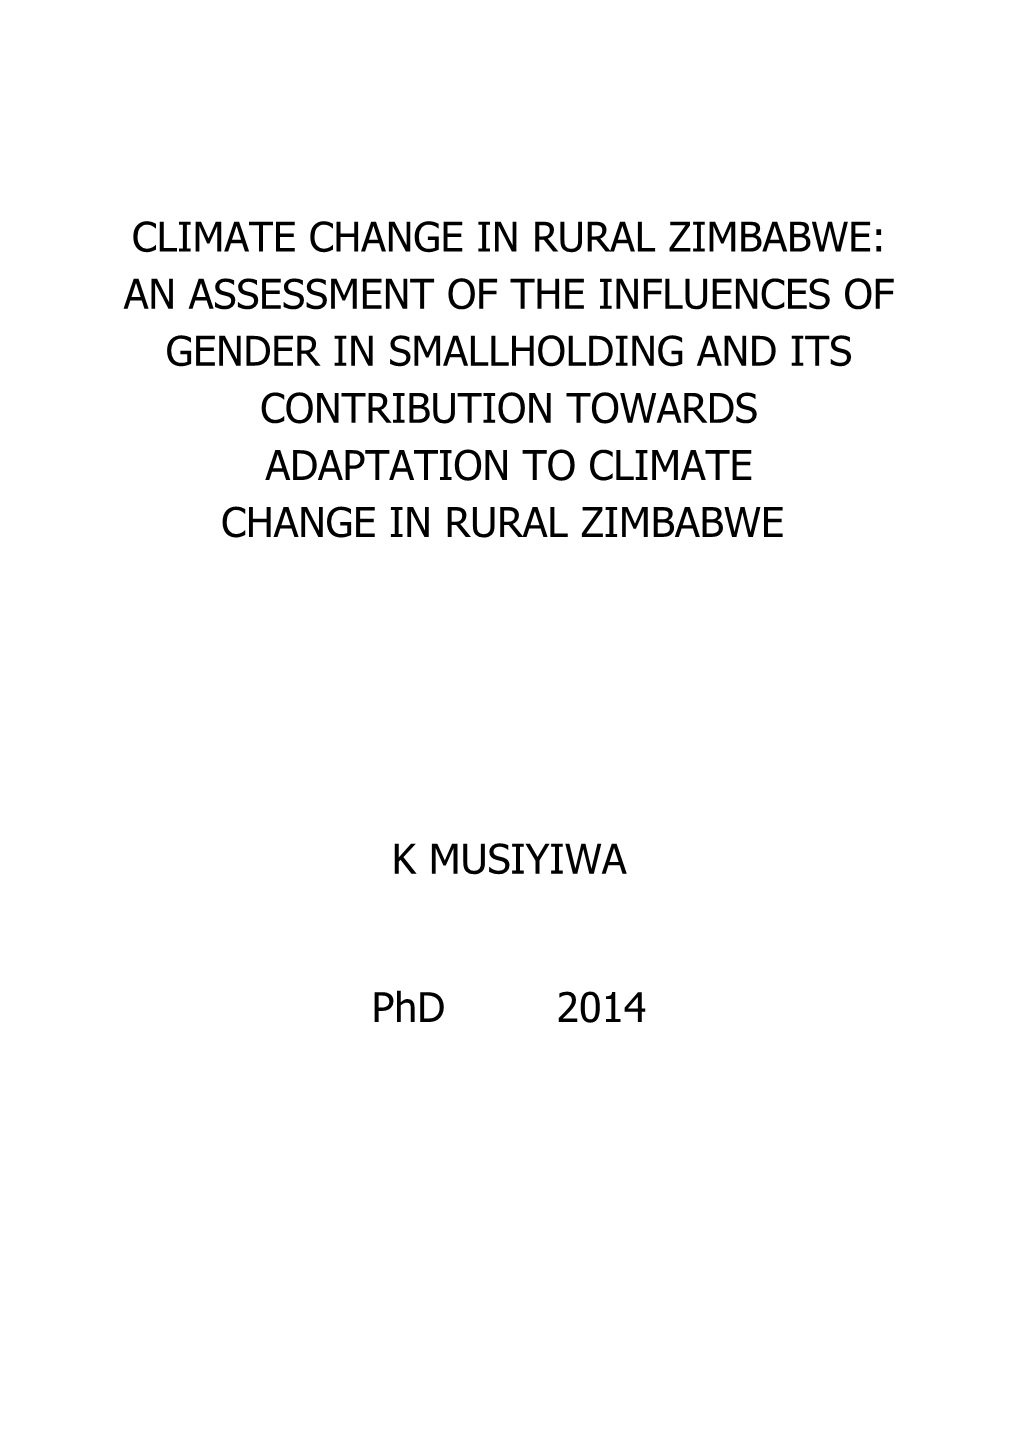 Climate Change in Rural Zimbabwe